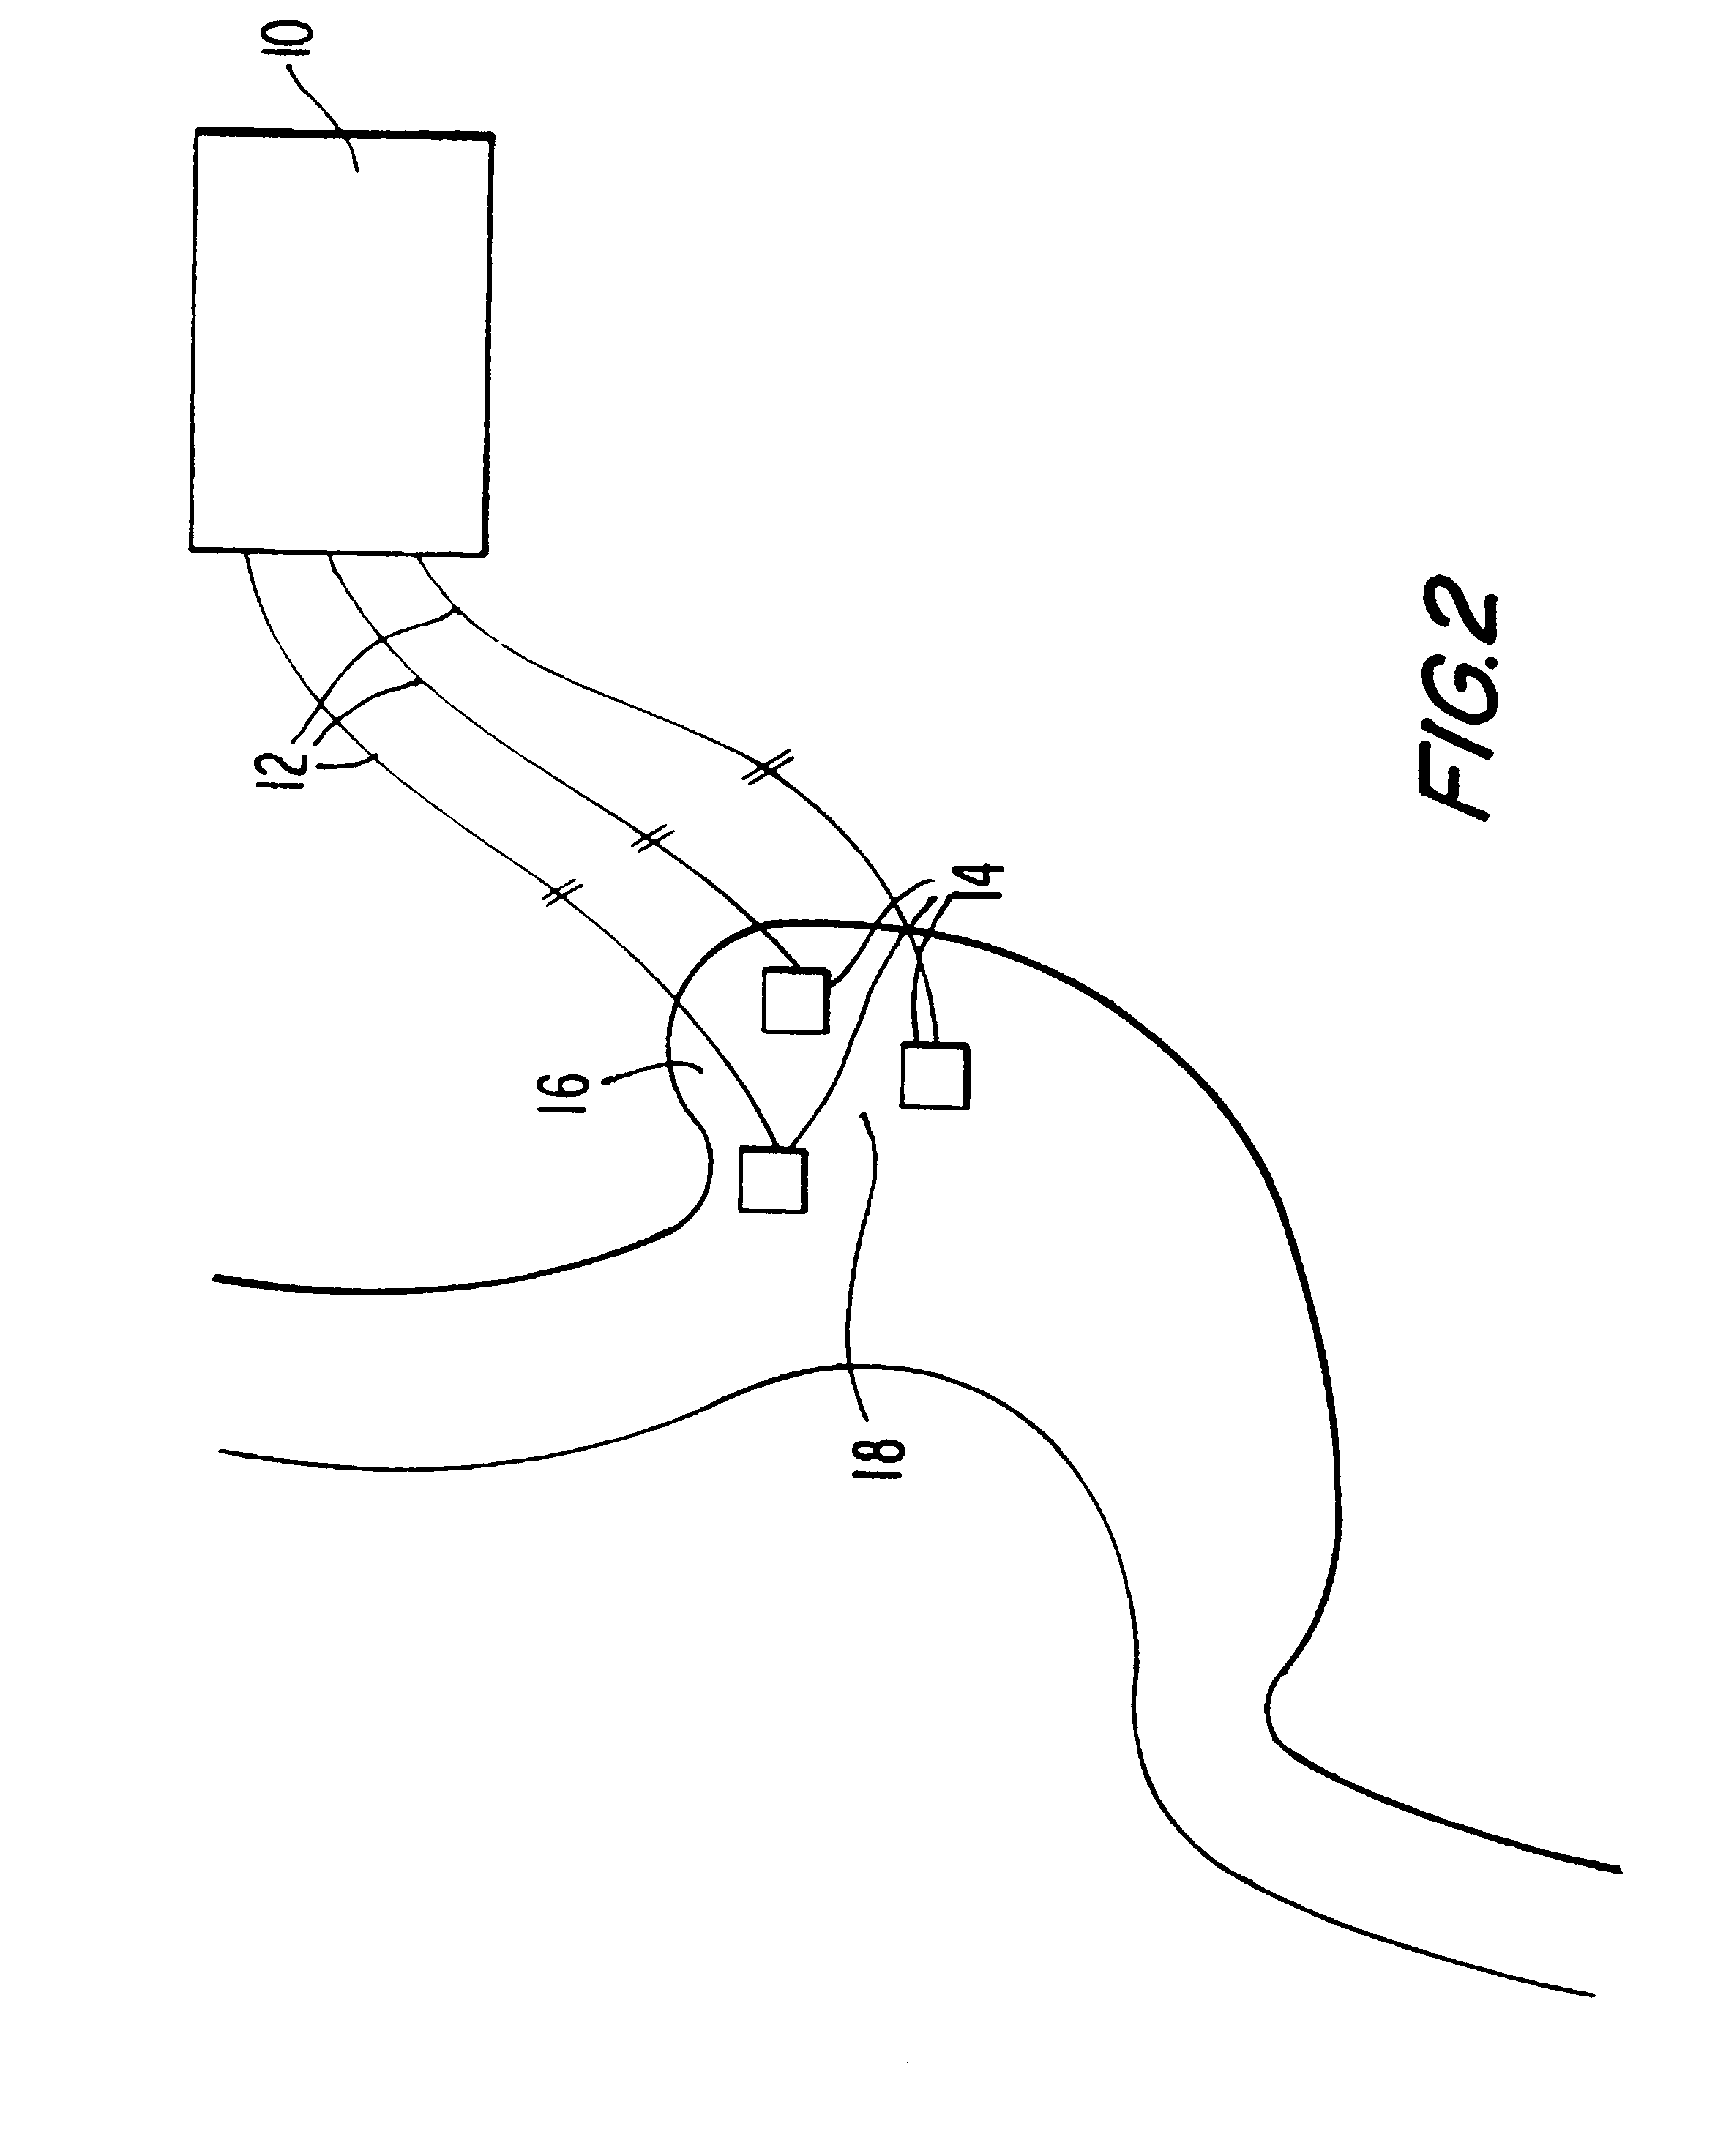 Electrical system for weight loss and laparoscopic implanation thereof